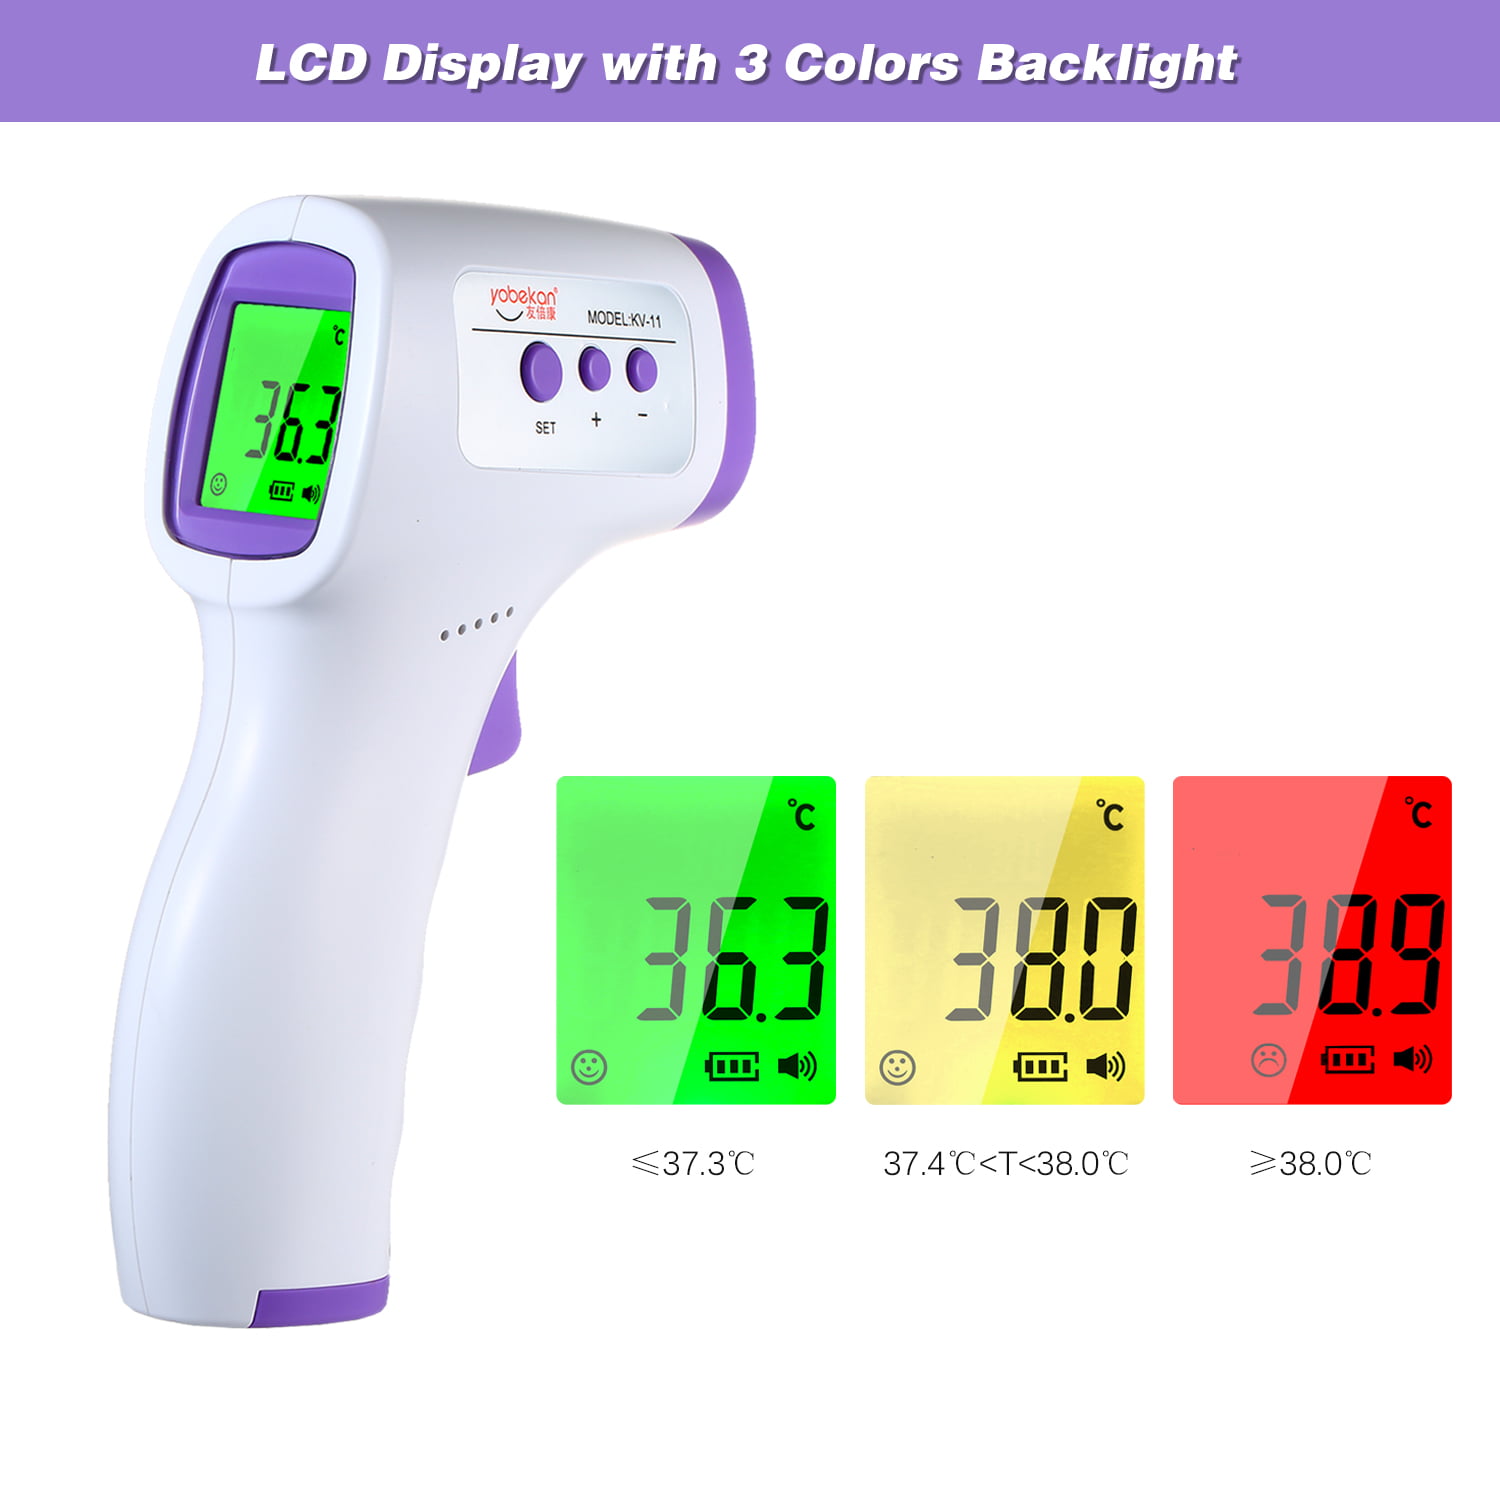 SU&YU Thermometer LCD Digital Non-Contact IR Infrared Thermometer Forehead Body Temperature Meter